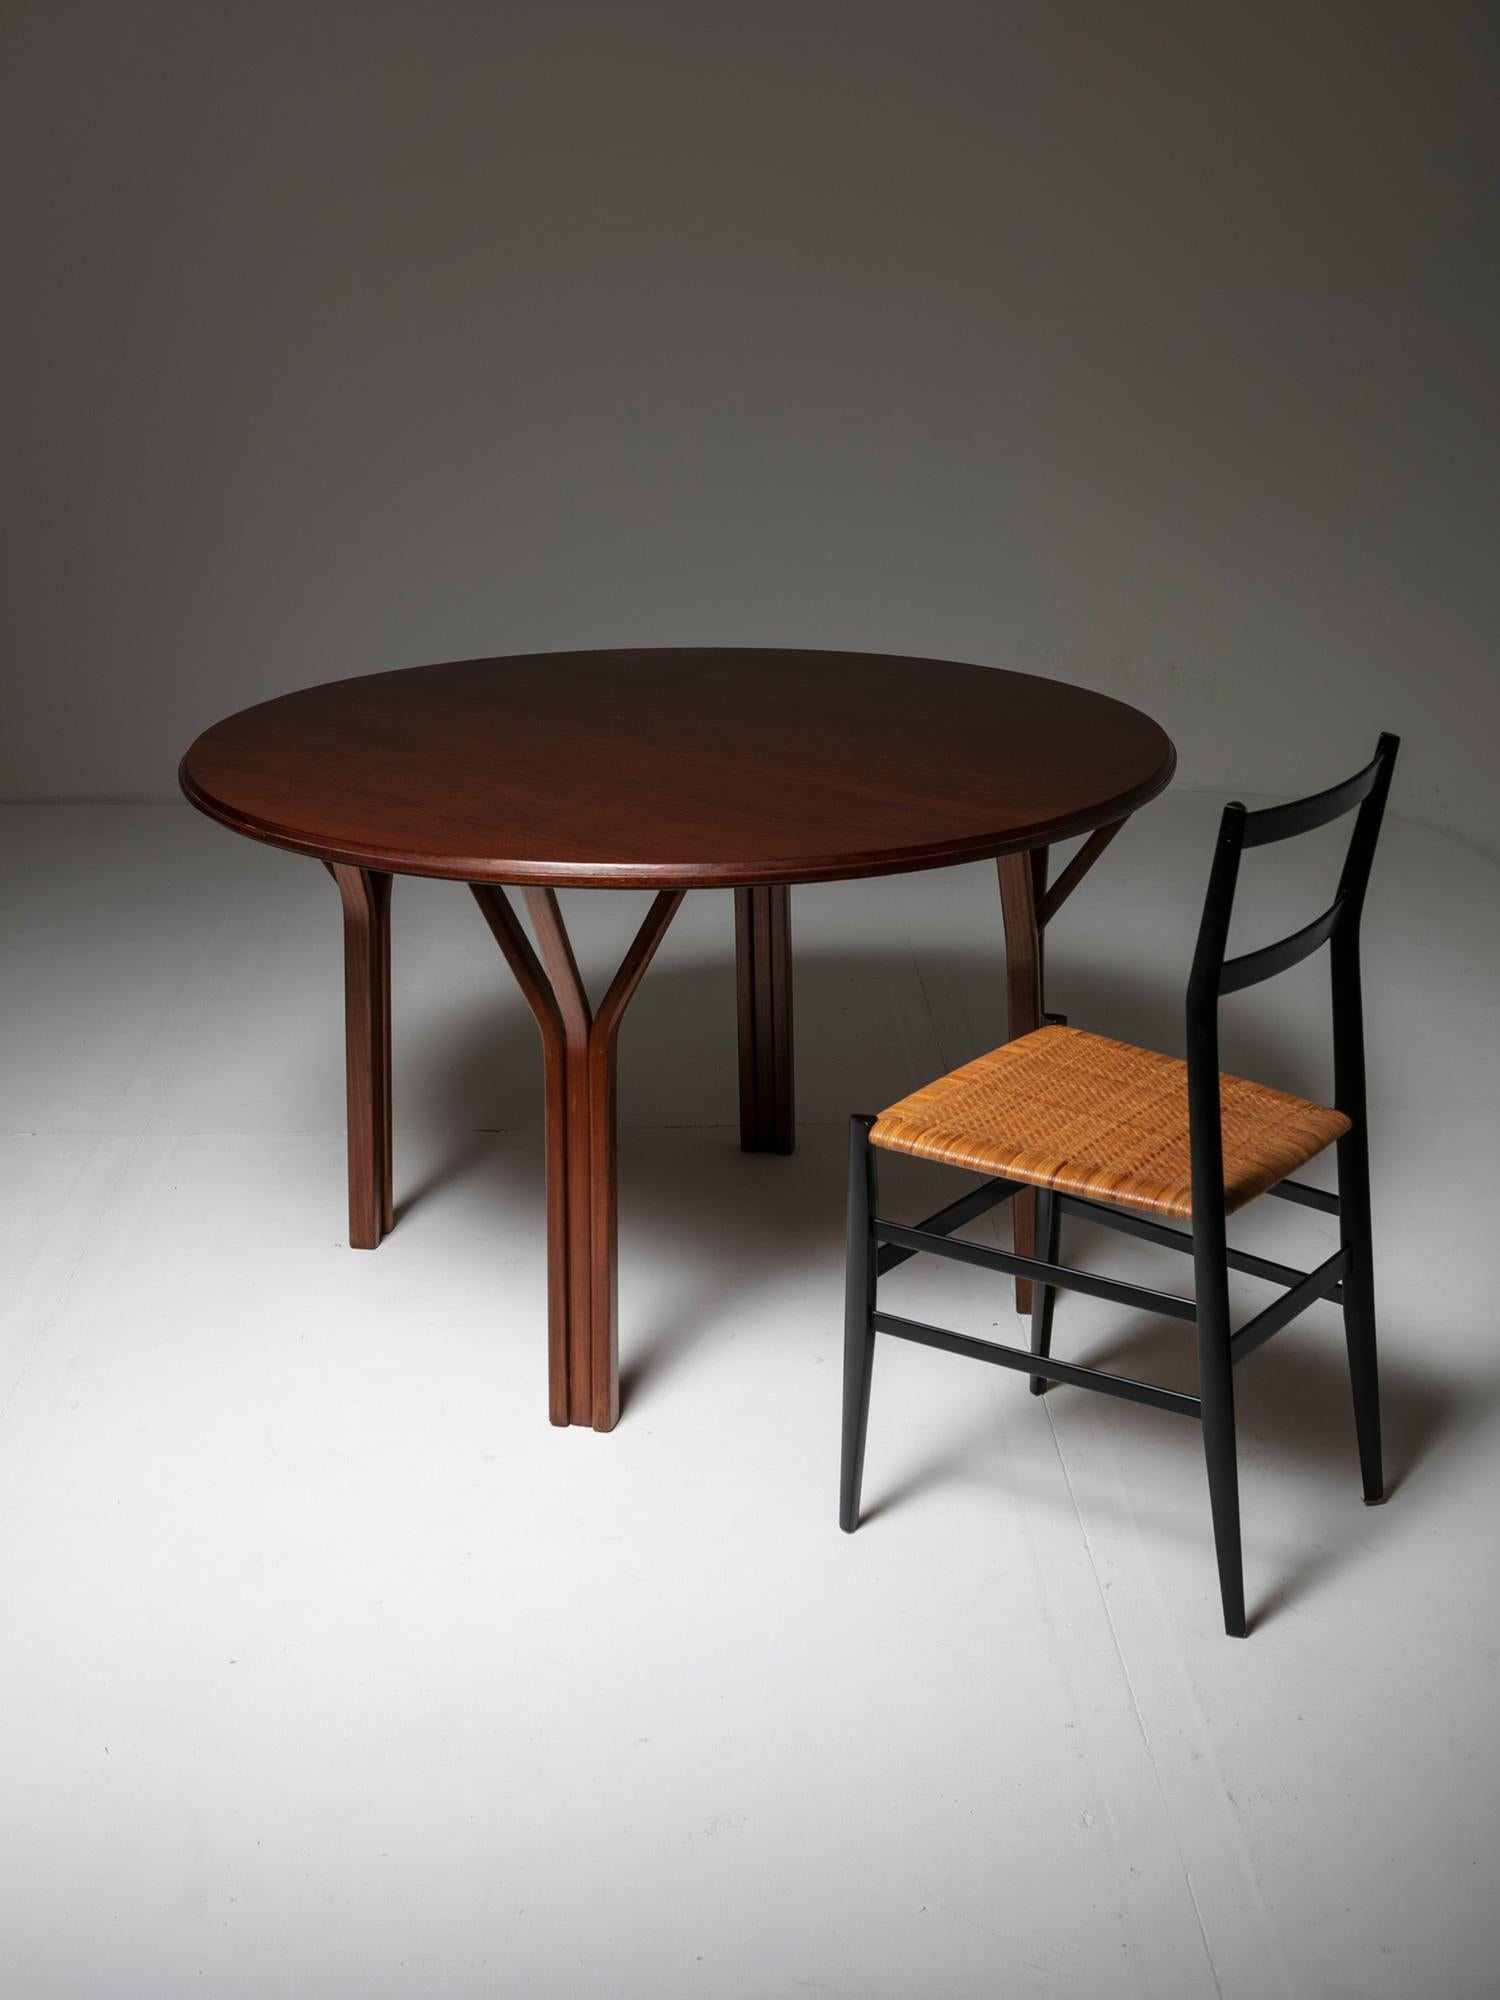 Mid-20th Century Round  Wood Table by Gregotti, Meneghetti, Stoppino for SIM, Italy, 1950s For Sale